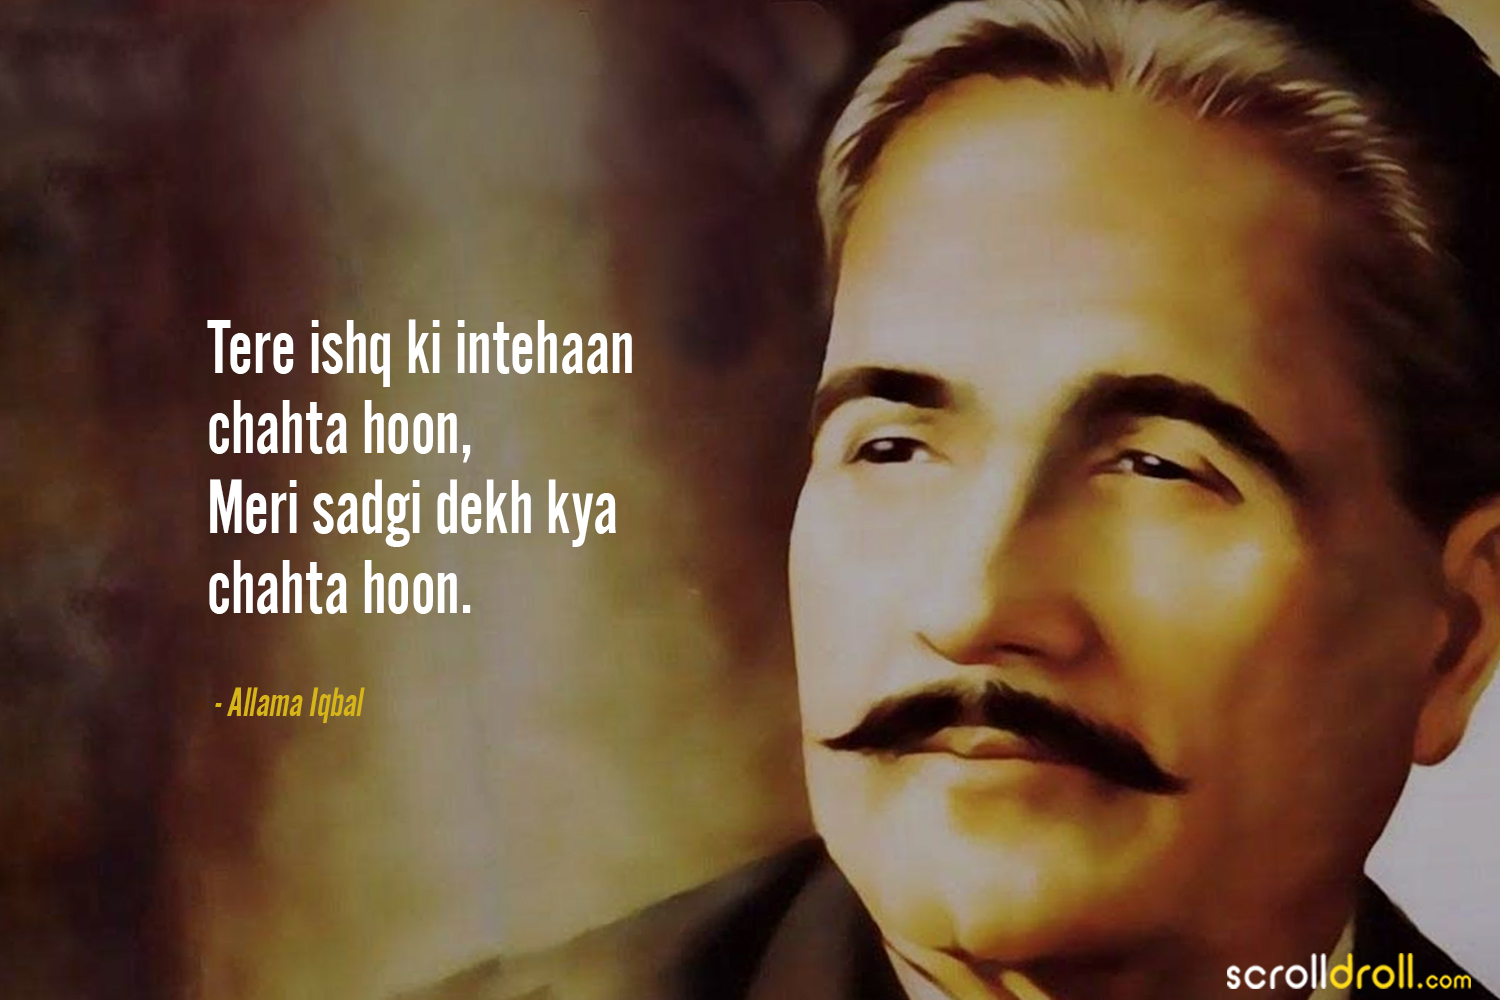 Shayaris-By-Allama-Iqbal-15 - The Best of Indian Pop Culture ...